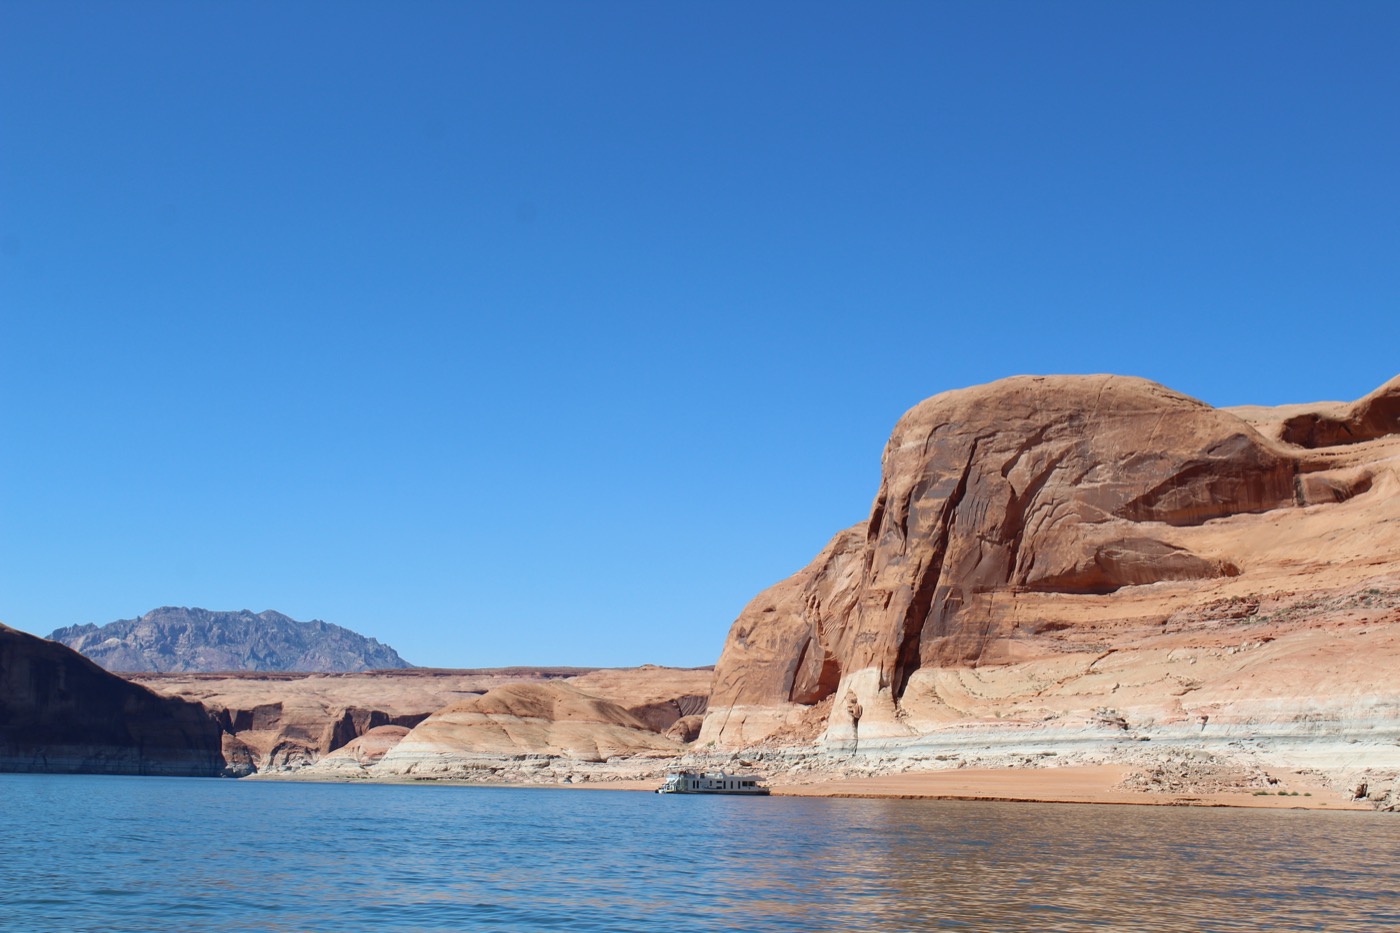 a landscape shot of desert mountains and a lake. you can tell by lighter colors on the canyon wall that the water level has receded